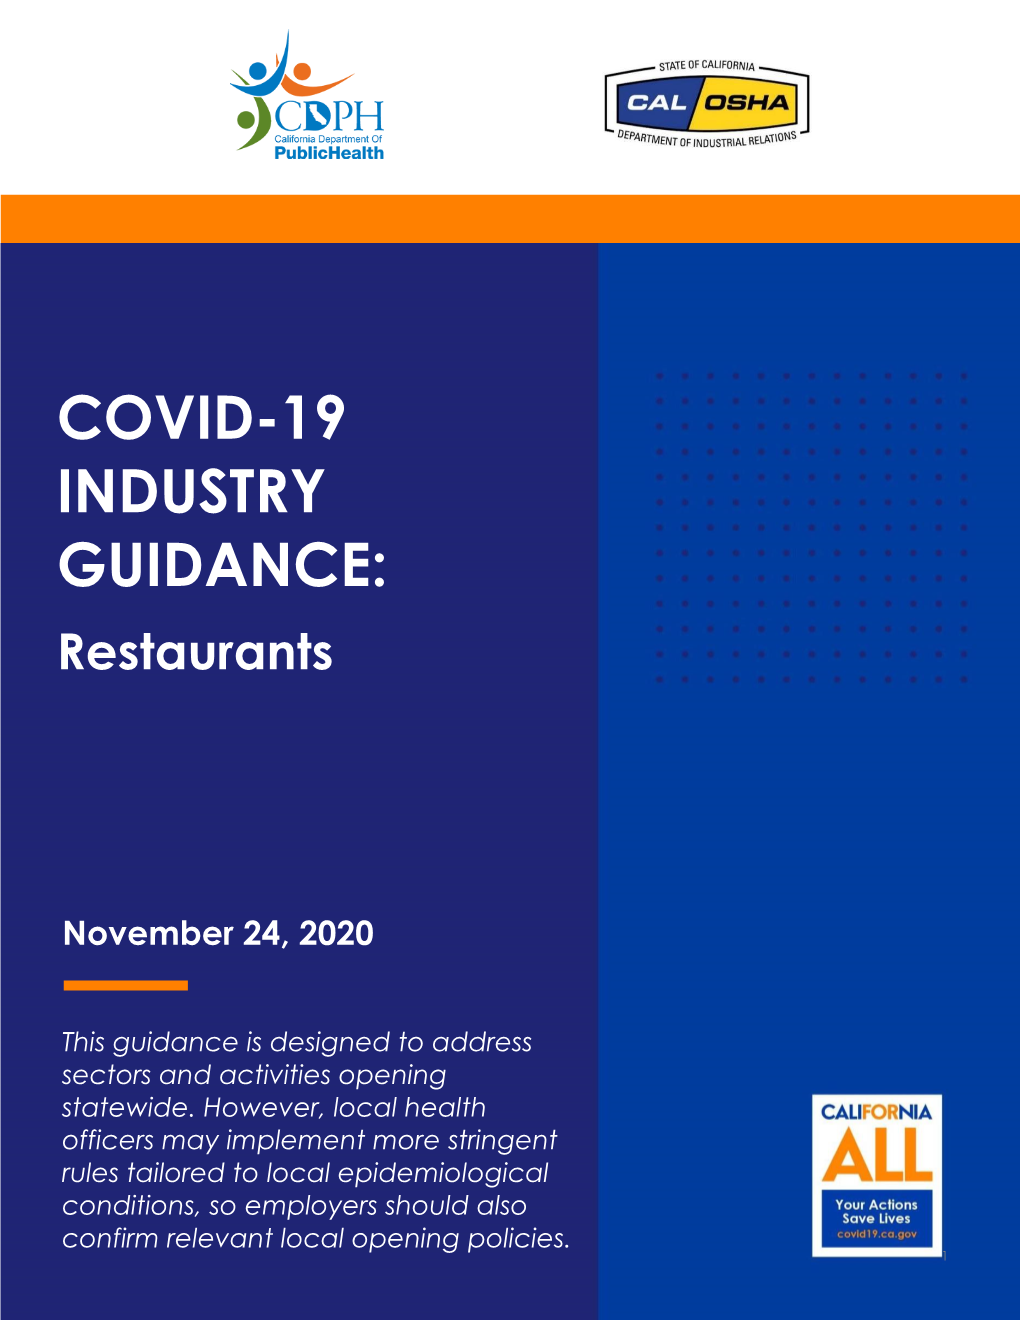 COVID-19 Industry Guidance: Dine-In Restaurants